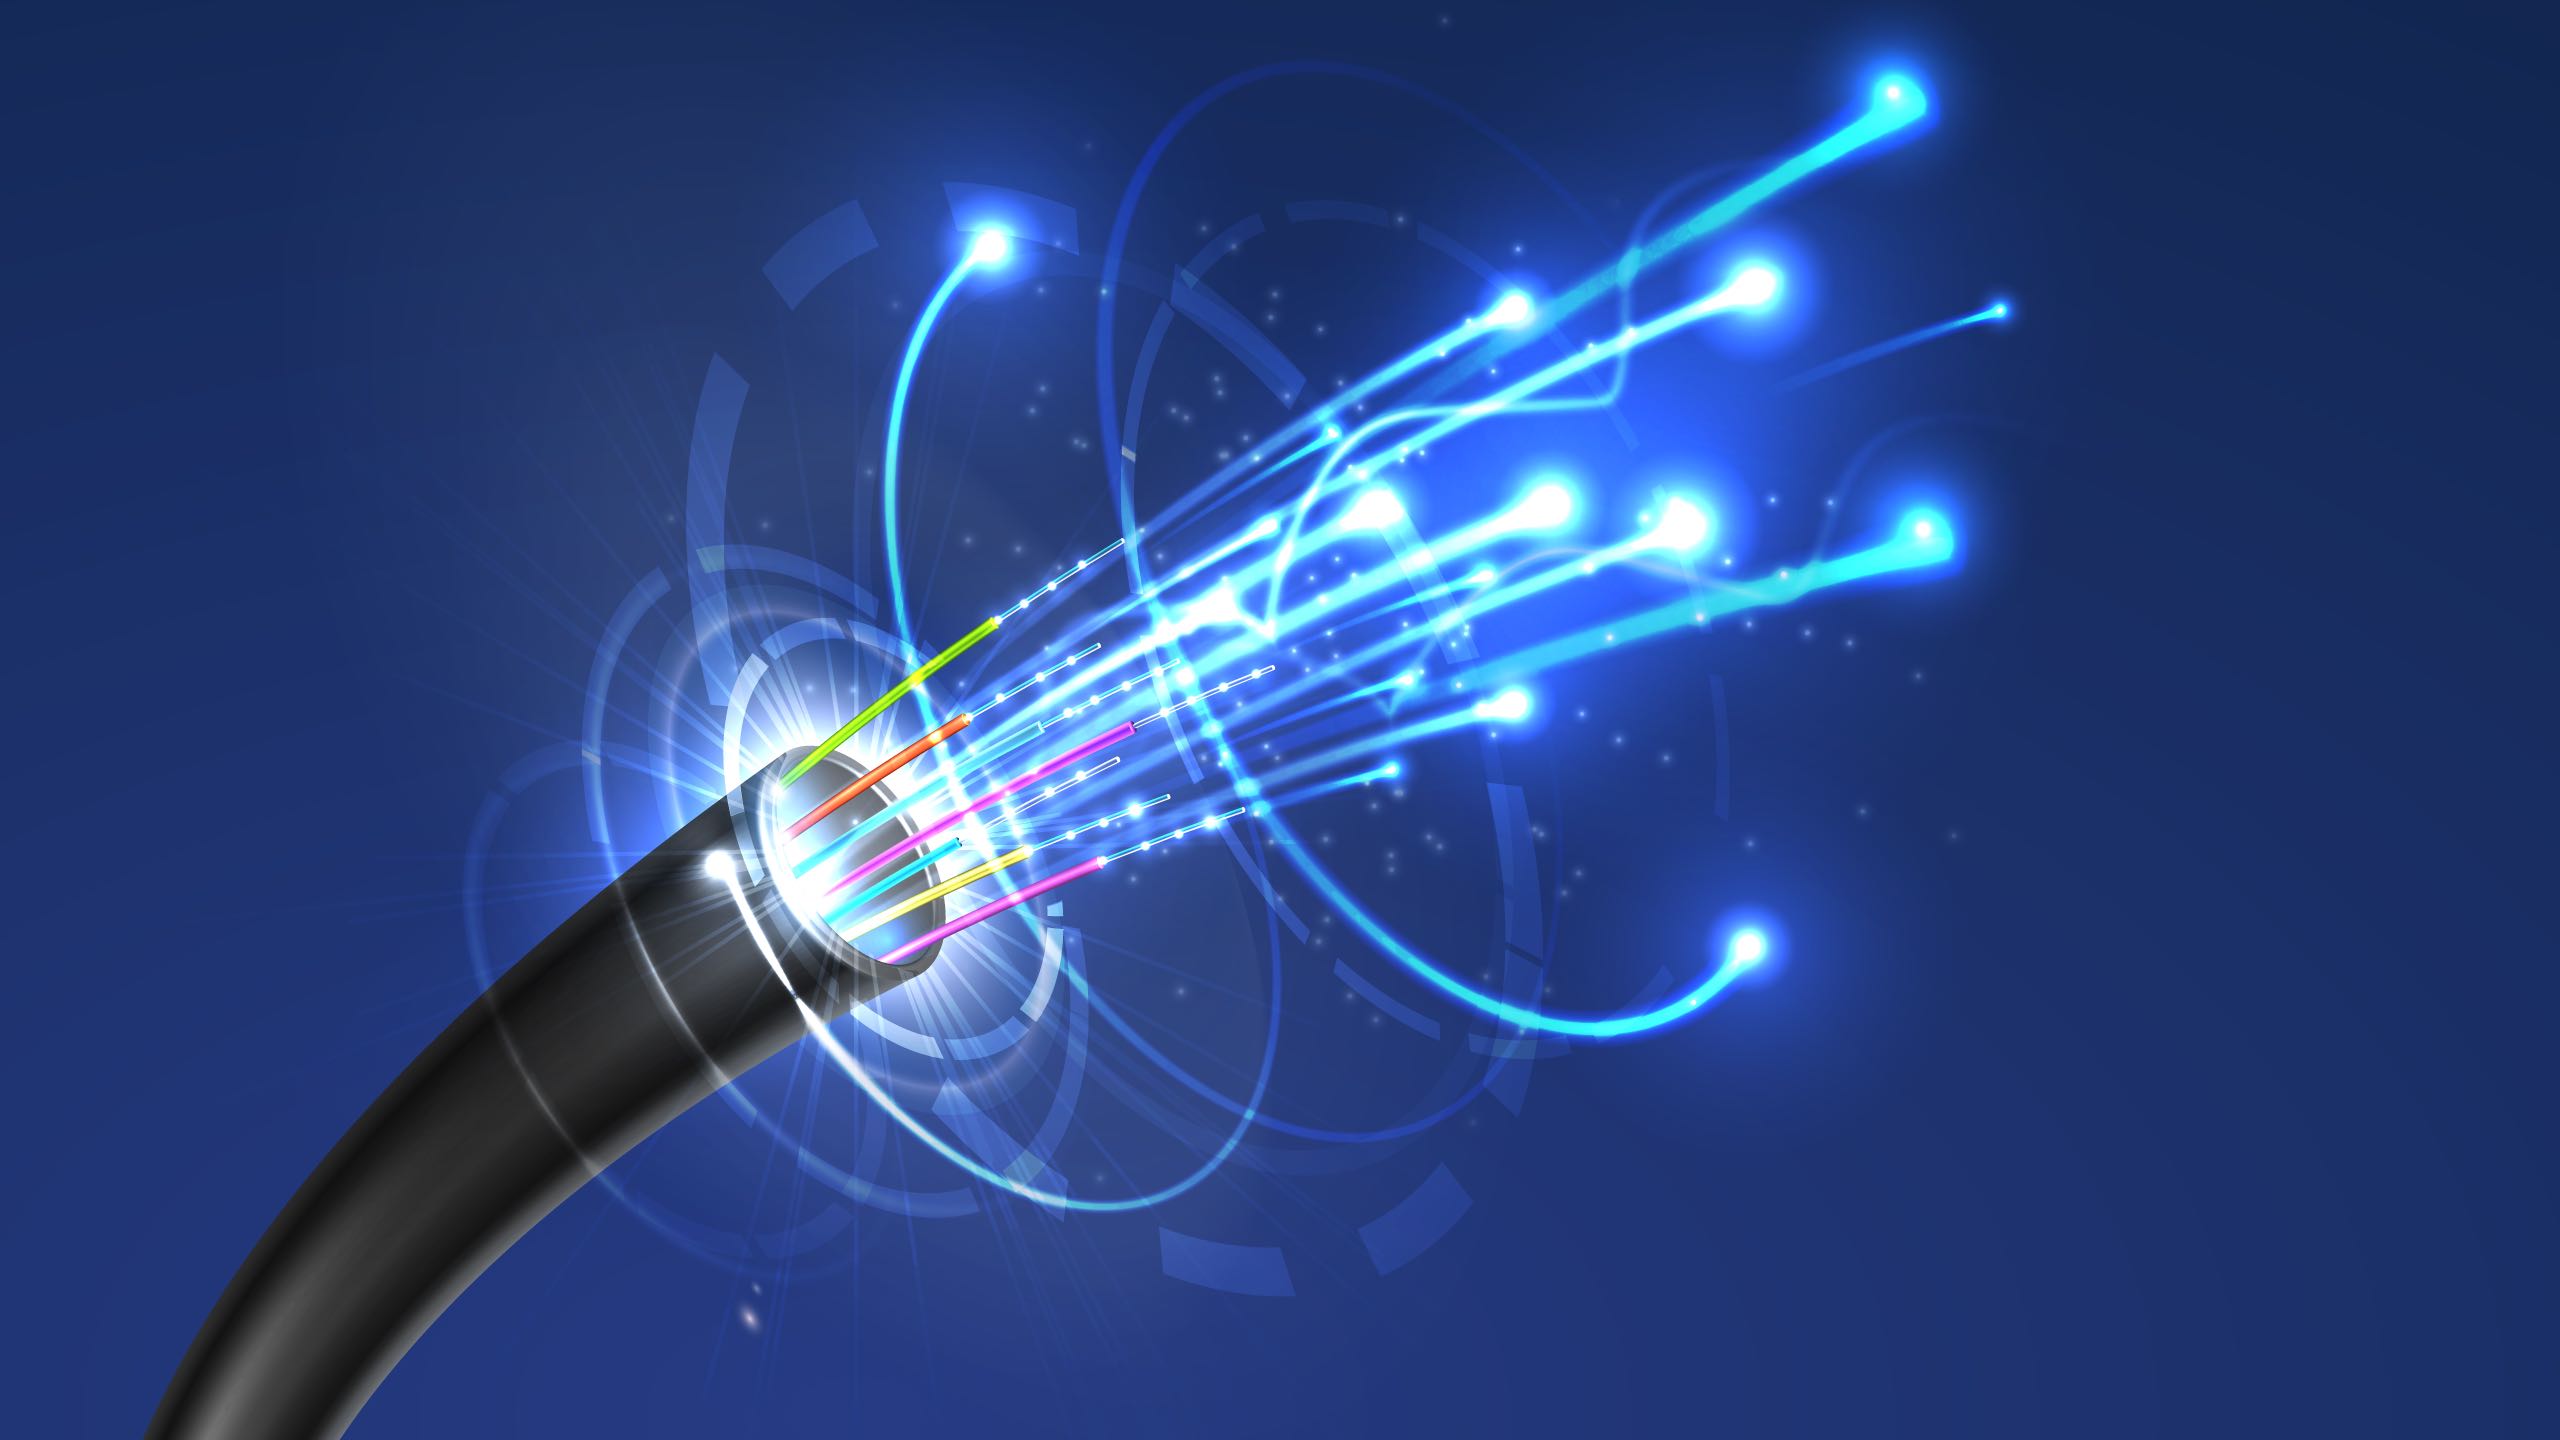 Fiber optic cable technology of internet, network, speed data connection and telecommunication. Multi fiber wire with cores in color jackets and blue neon lines, communication networking.